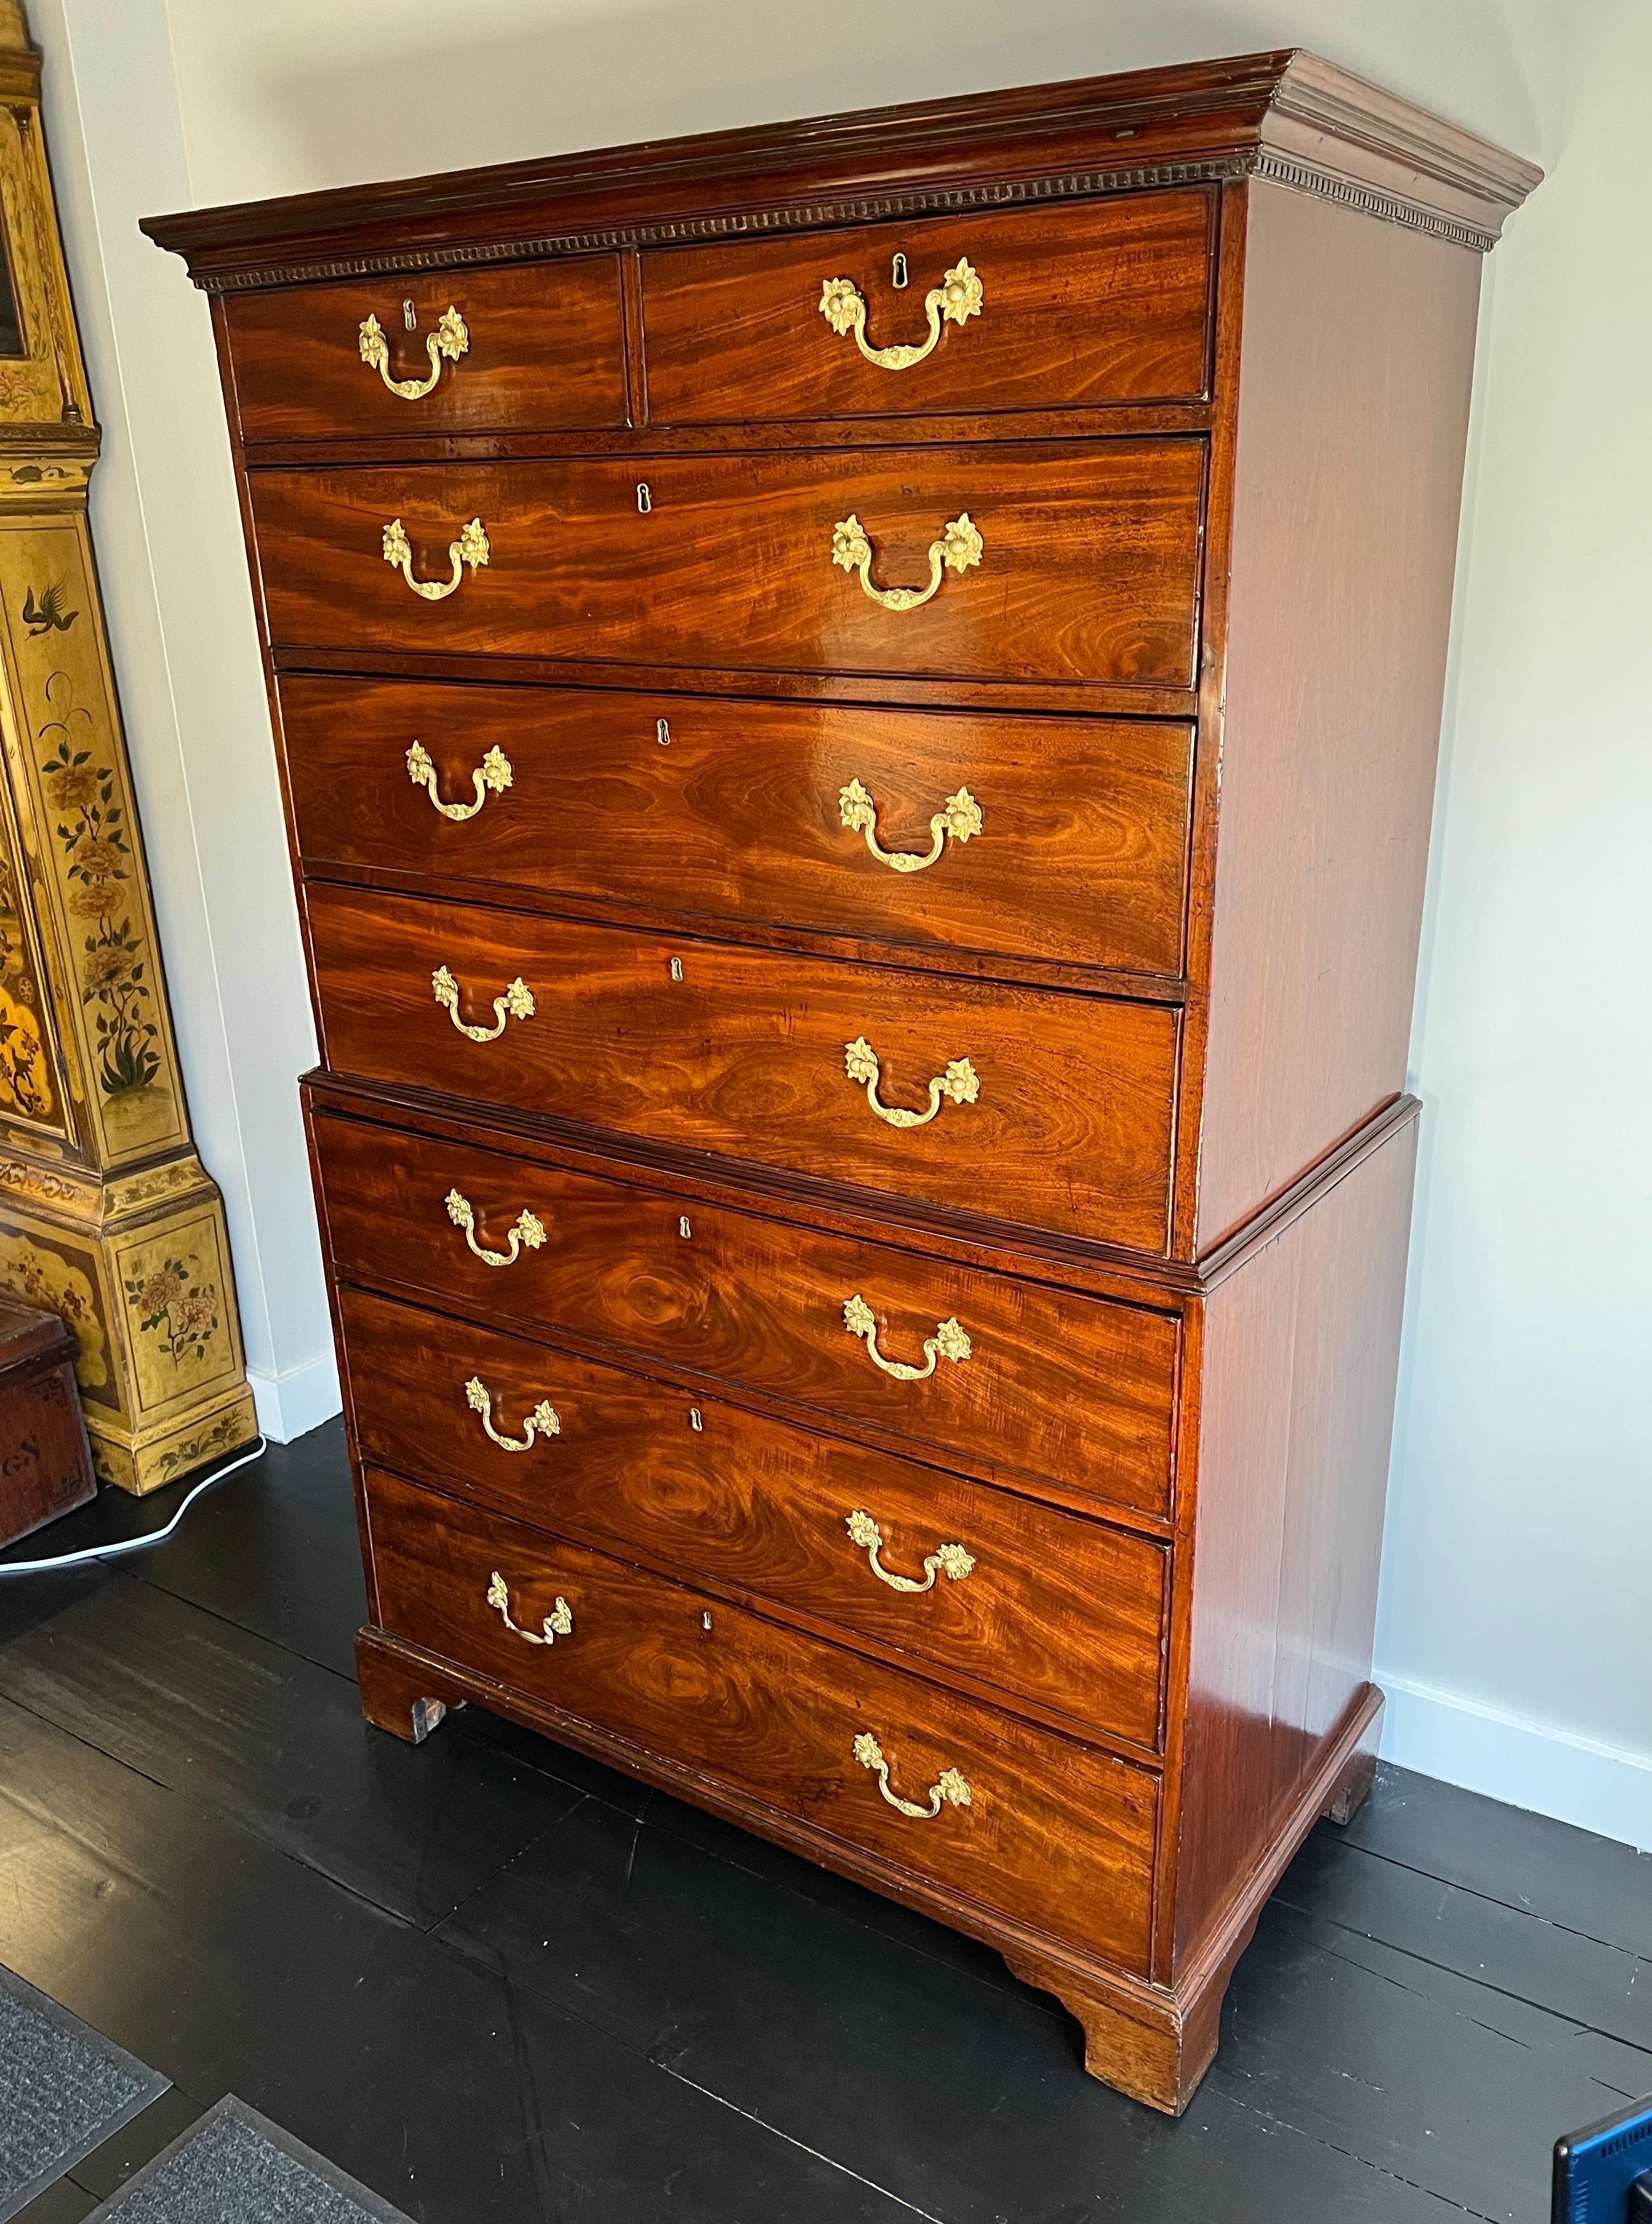 George III Mahogany Chest on Chest English, circa 1790.
This Chest on Chest has a lovely Color, a warm and lightly faded patina. With 8 drawers, 2 small drawers top drawers, above 6 long drawers, graduating in Size.
With a crown molding above a